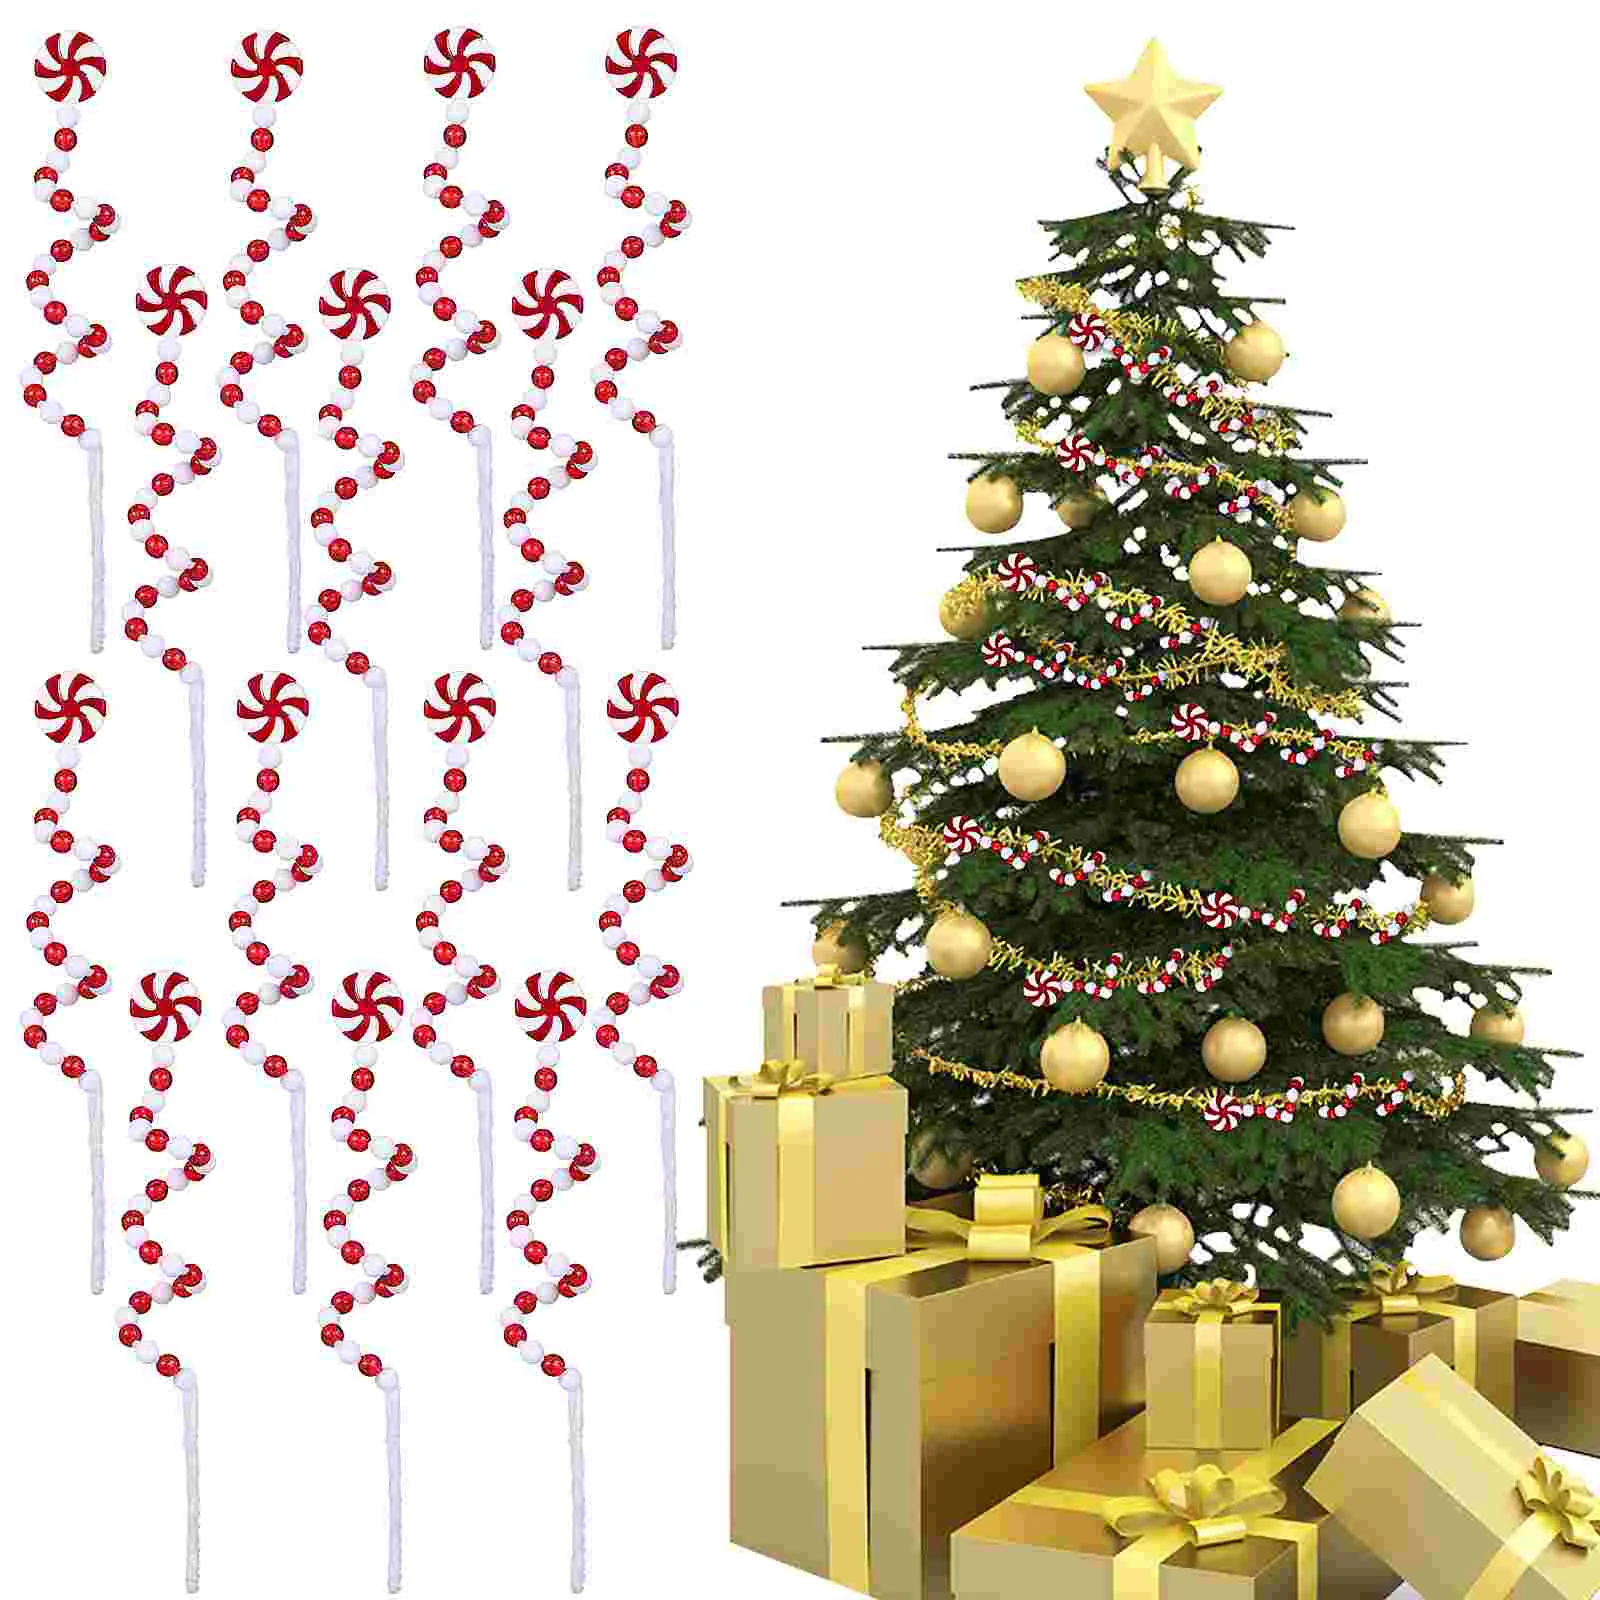 

25 Pcs Christmas Decorations Tree Ornaments Candy Cane Props Swirl Sticks For Vase Plastic Canes